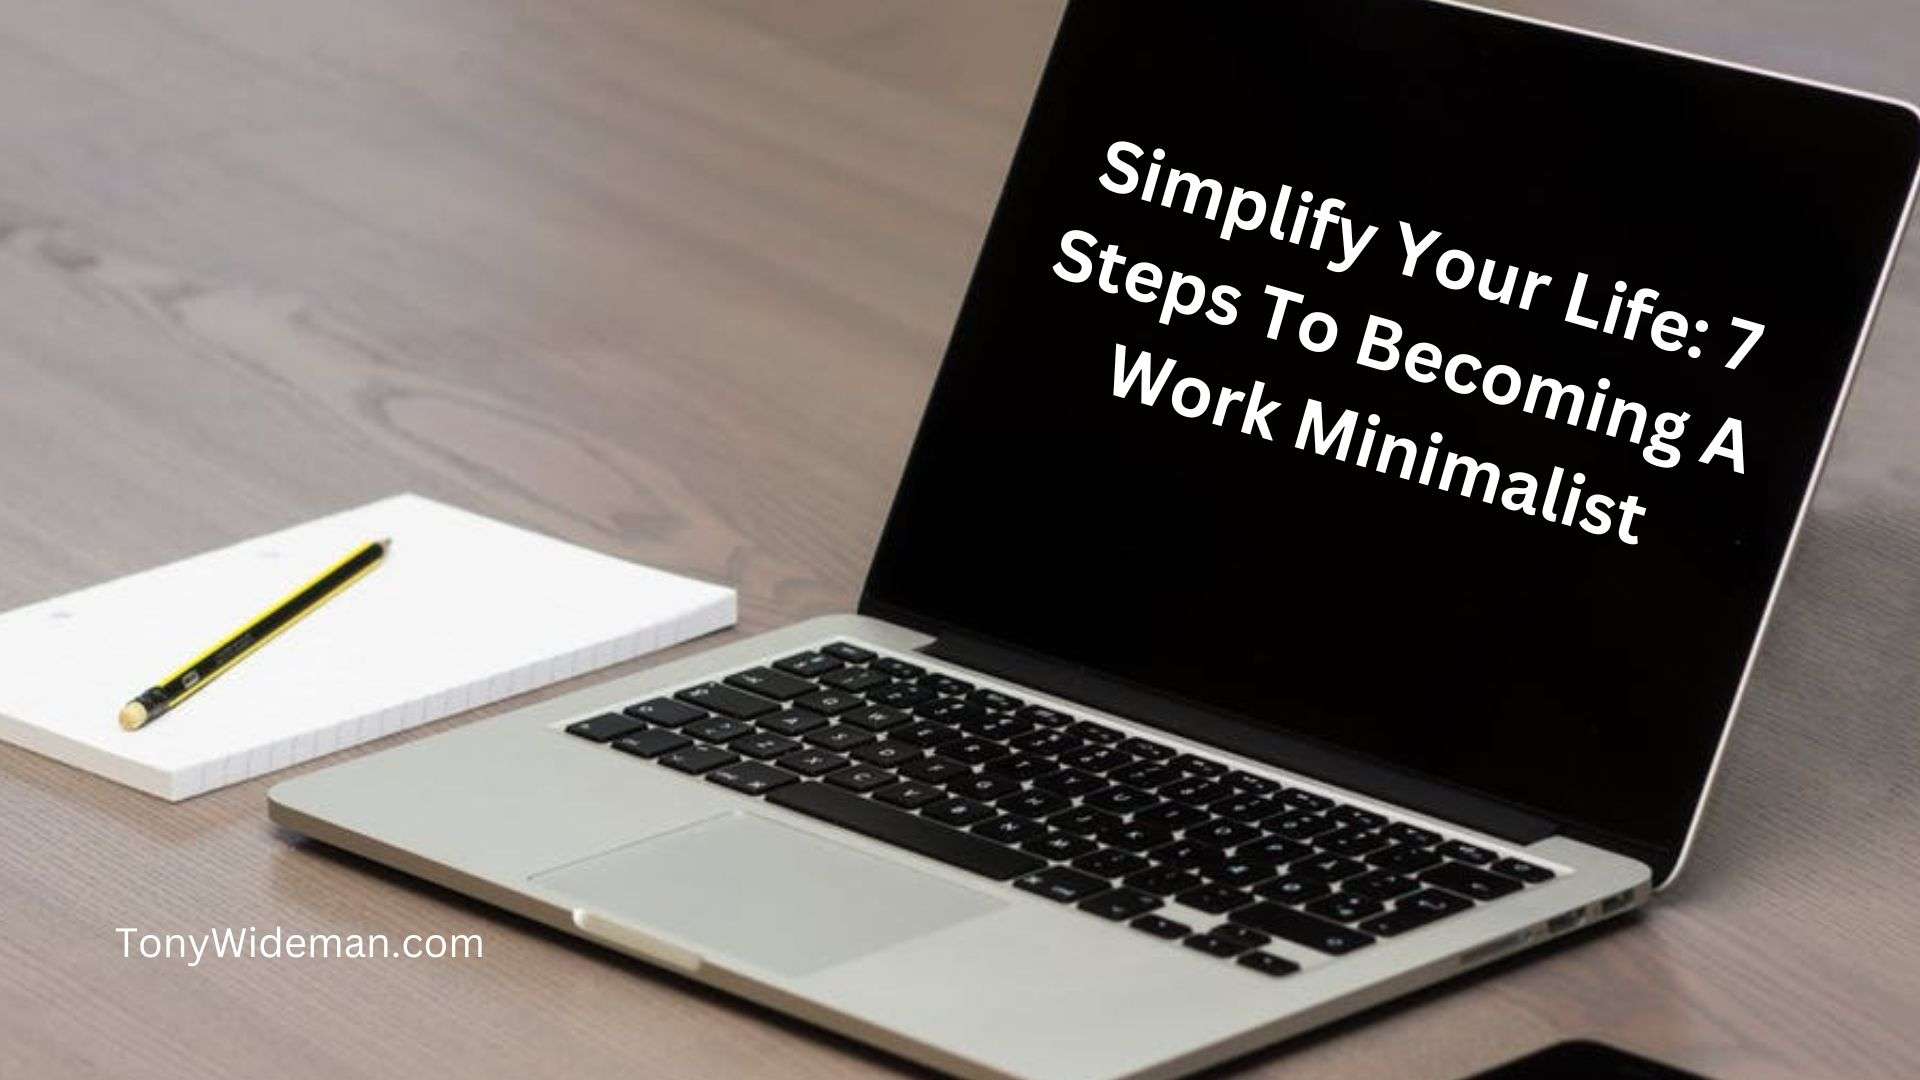 Simplify Your Life: 7 Steps To Becoming A Work Minimalist